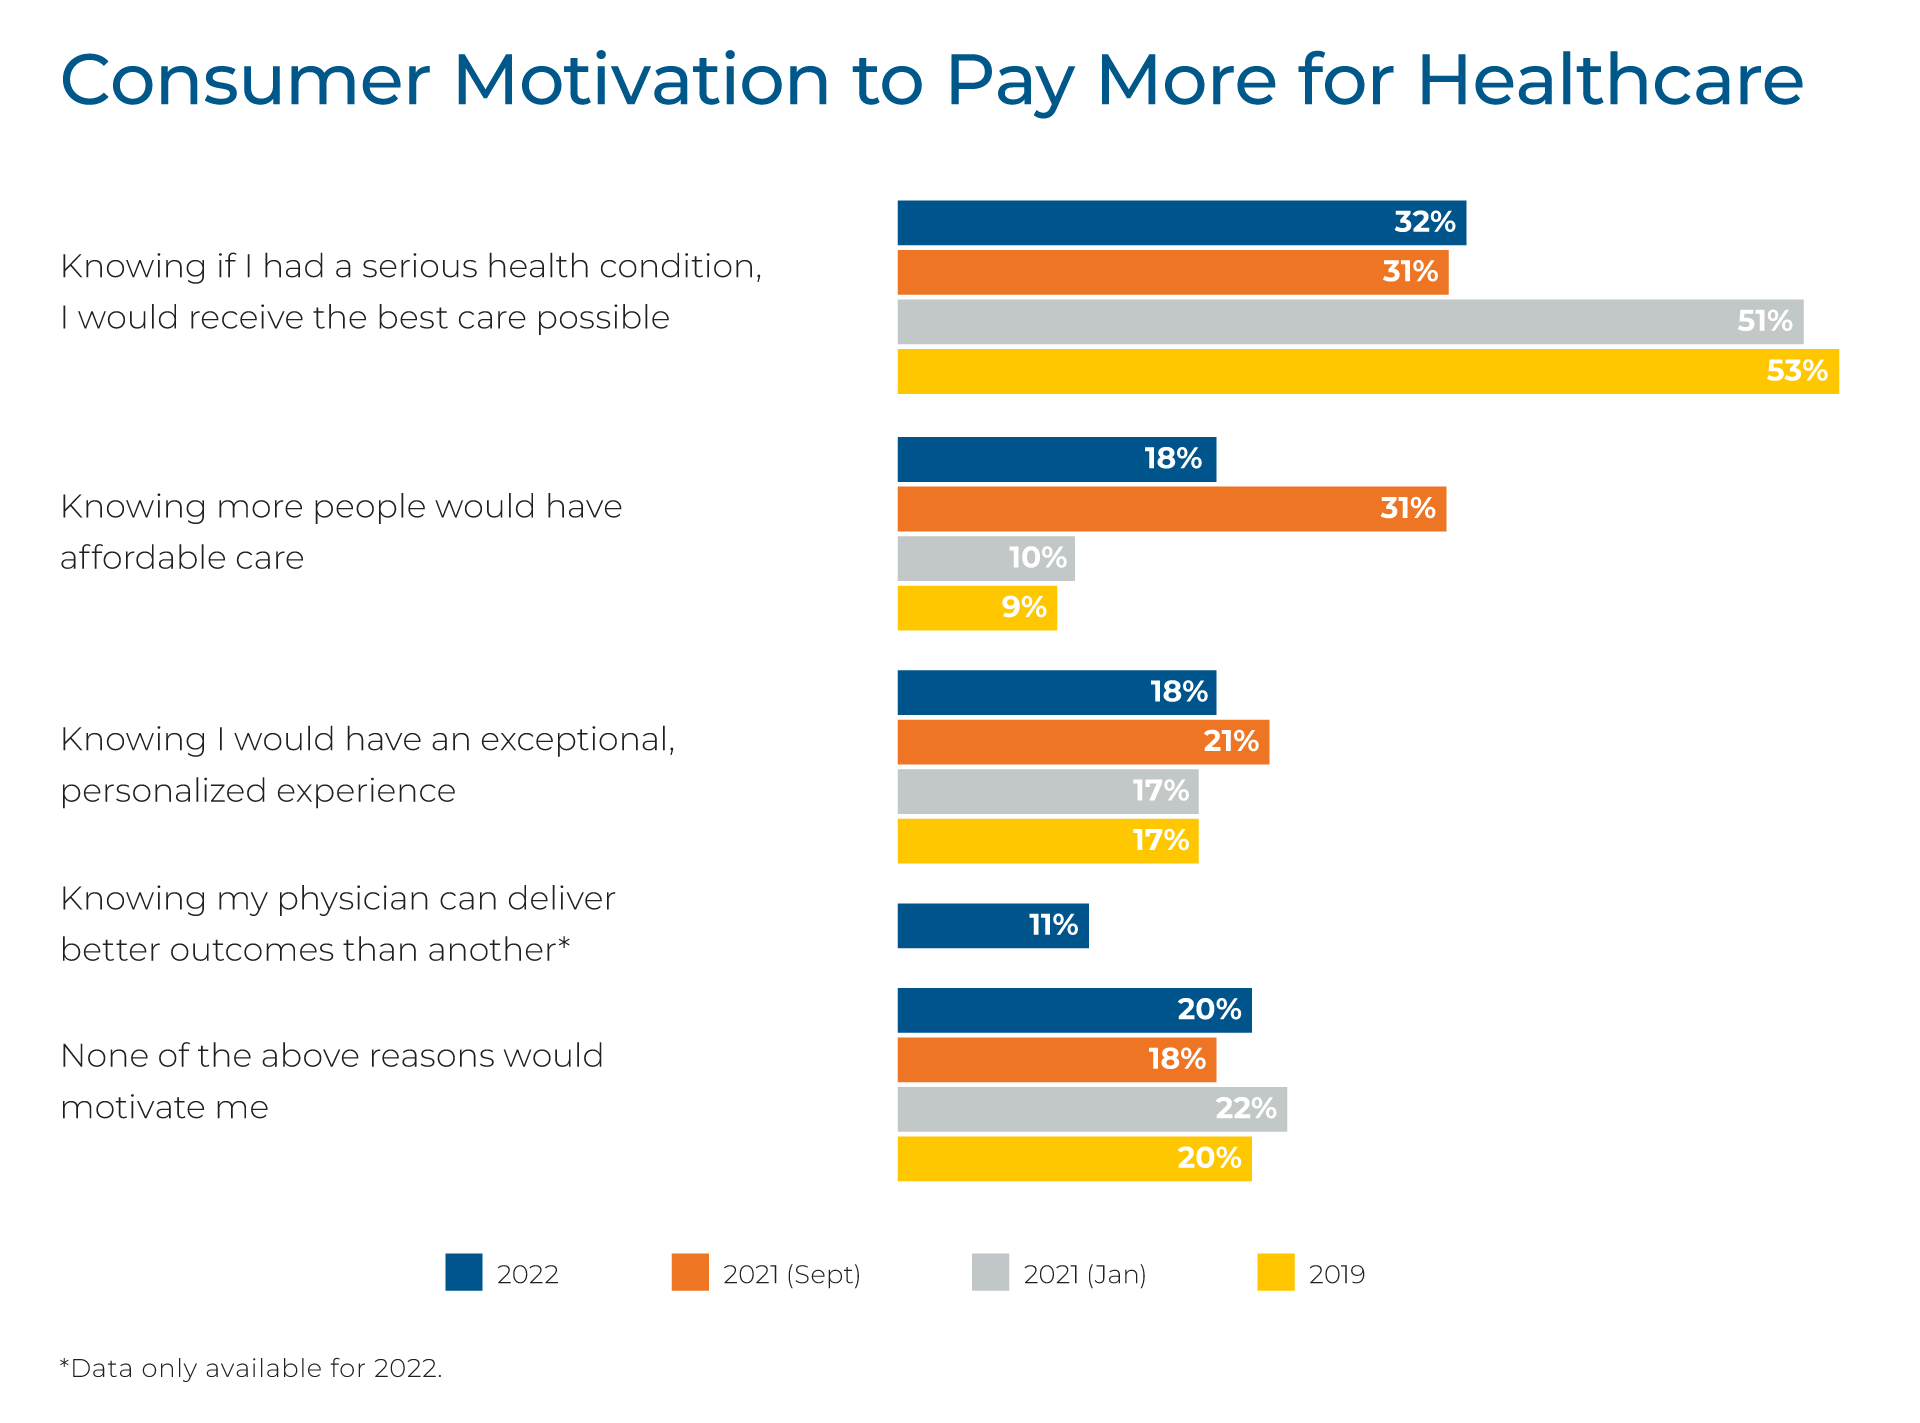 A bar chart representing consumers’ declining motivation to pay more for healthcare between 2019, 2021, and 2022. Consumers indicate less motivation to pay more for care knowing they would receive the best care possible if they had a serious medical condition, knowing more people would have affordable care, and knowing they would have an exceptional, personalized experience. 